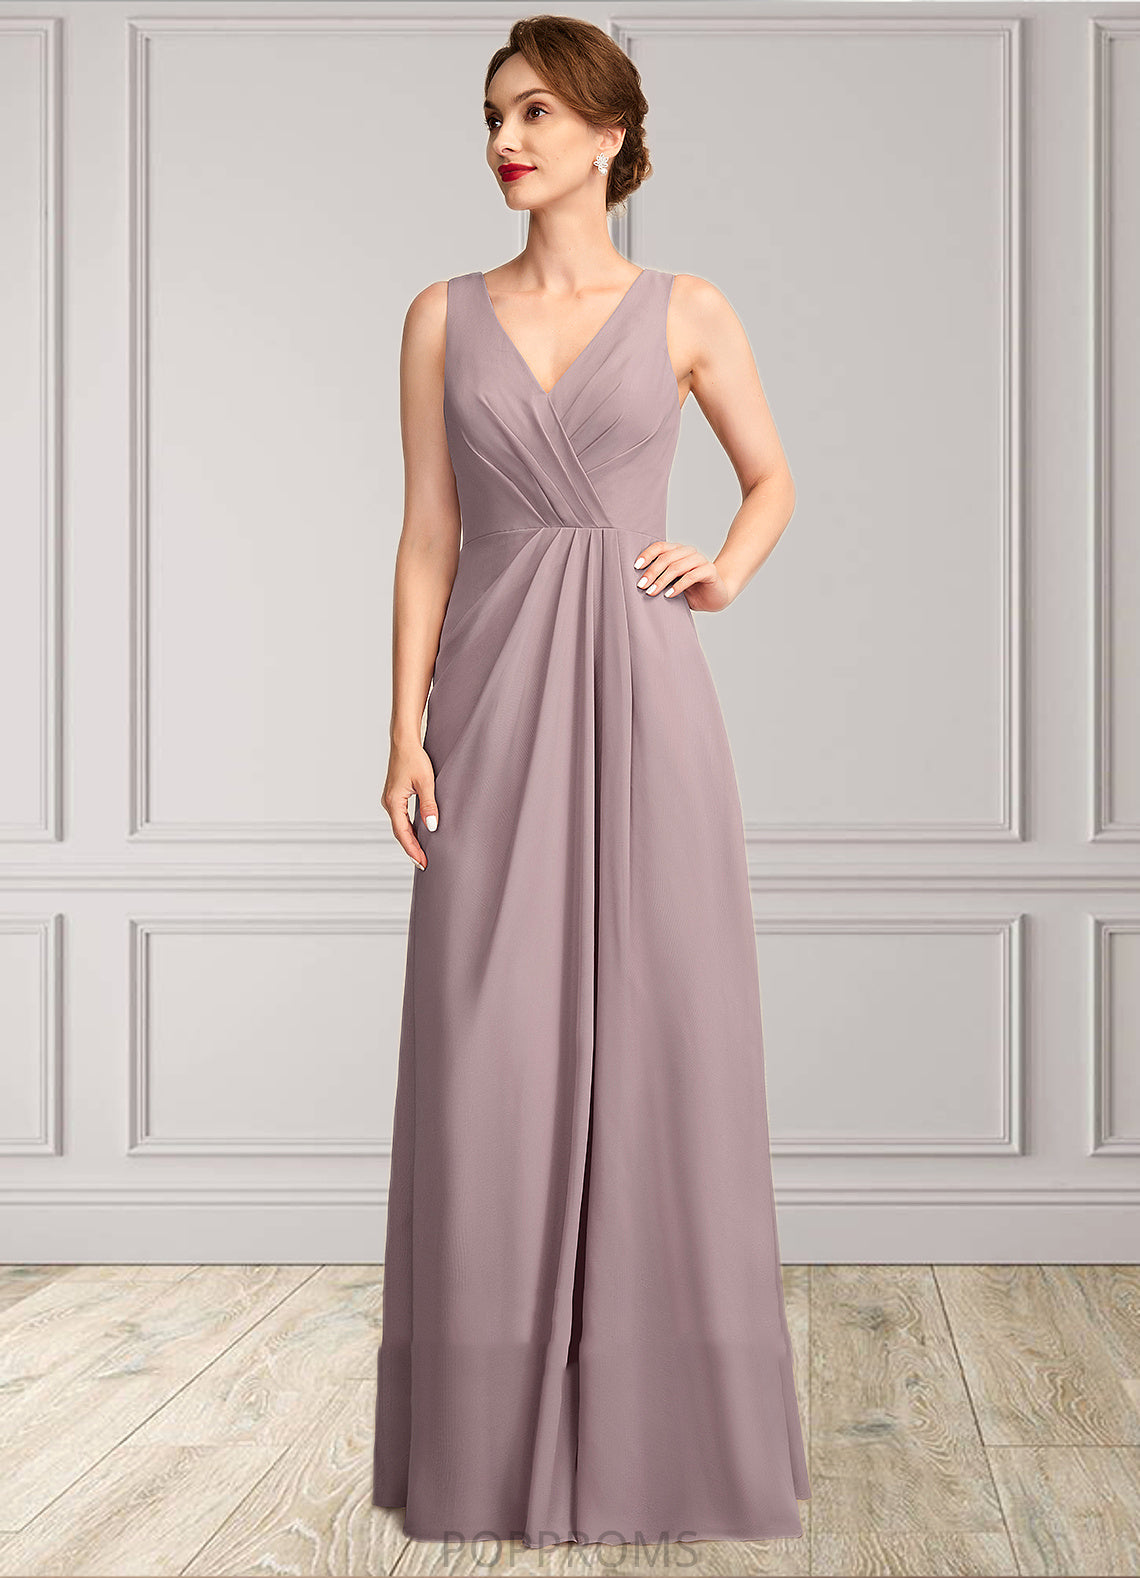 Victoria A-Line V-neck Floor-Length Chiffon Mother of the Bride Dress With Ruffle PP6126P0015026